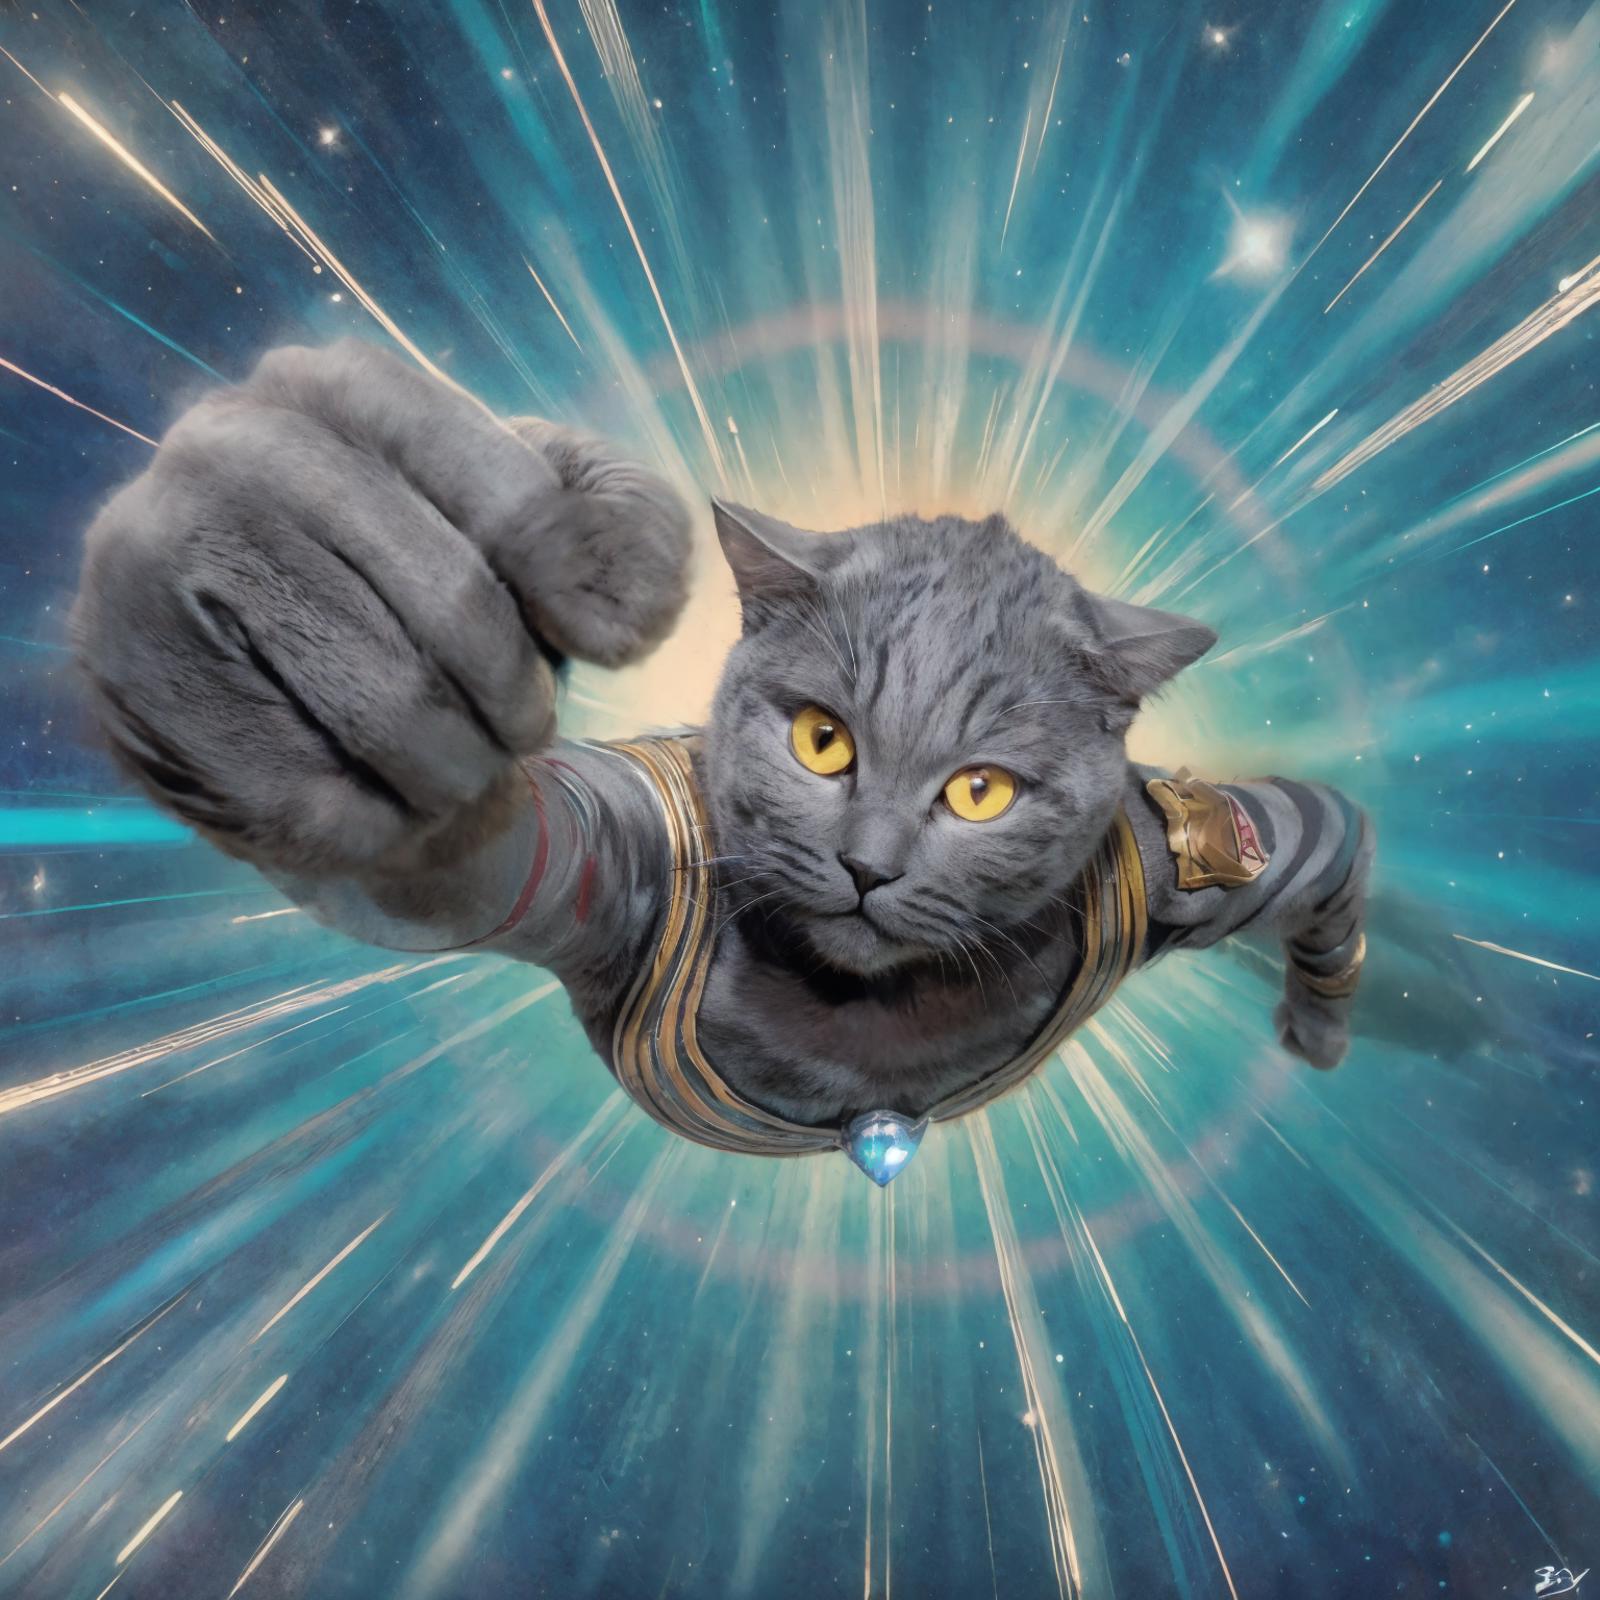 A cat in a silver and blue suit flying through space.